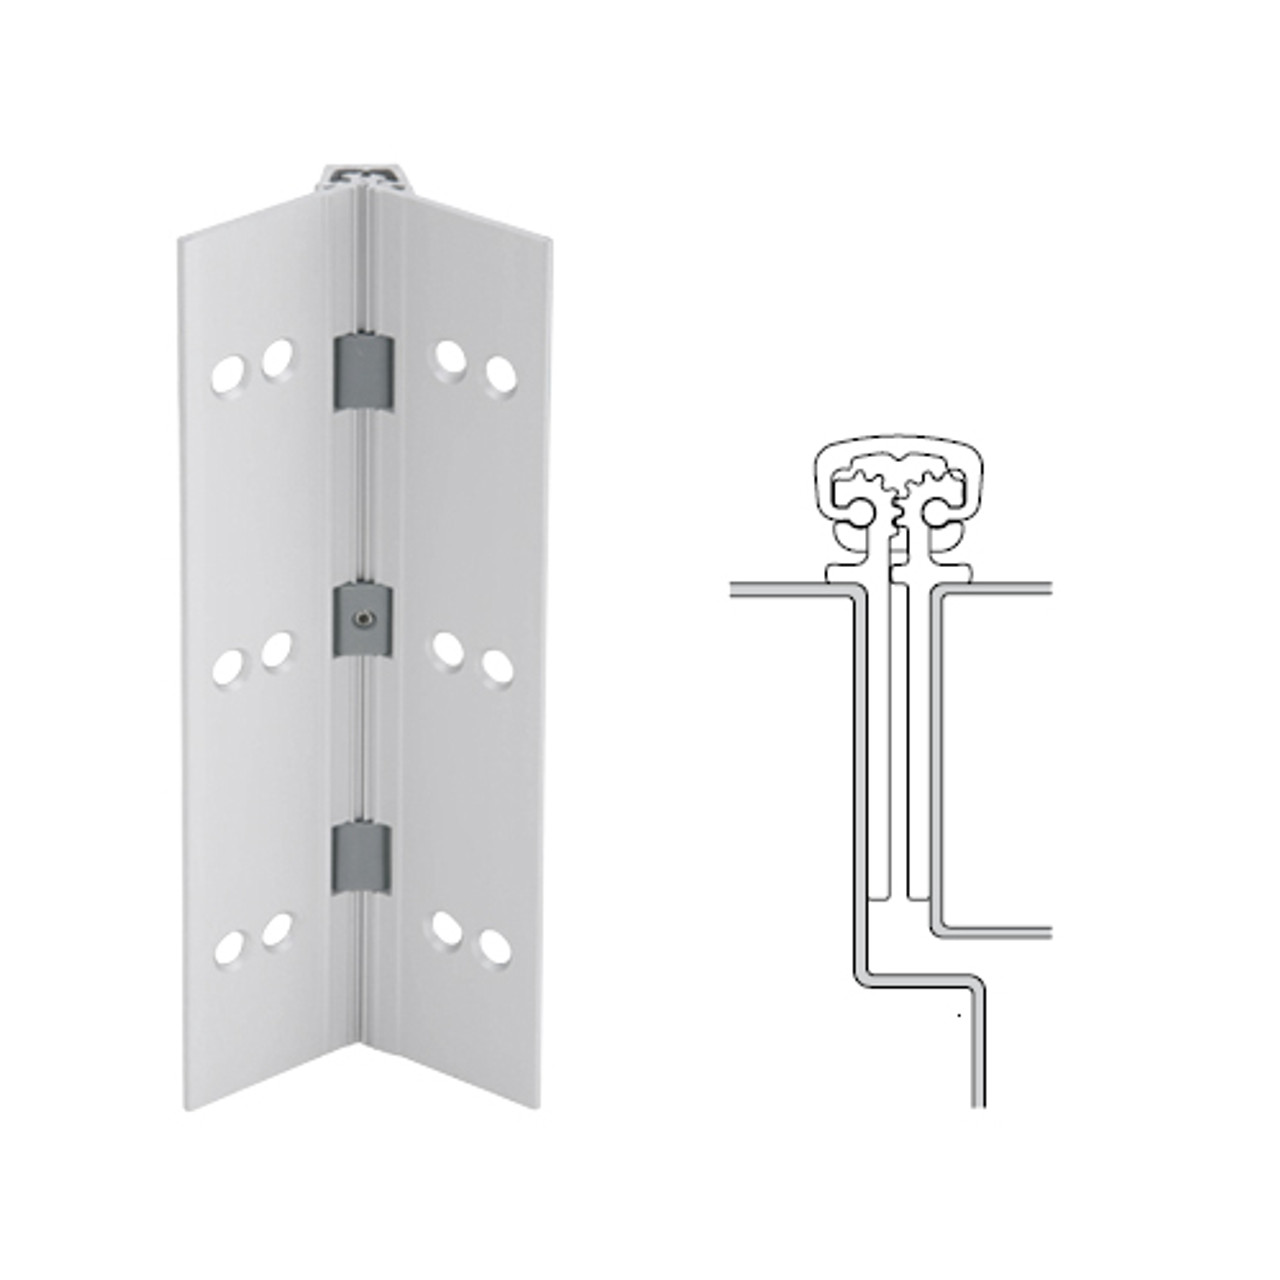 112XY-US28-83-SECWDHM IVES Full Mortise Continuous Geared Hinges with Security Screws - Hex Pin Drive in Satin Aluminum